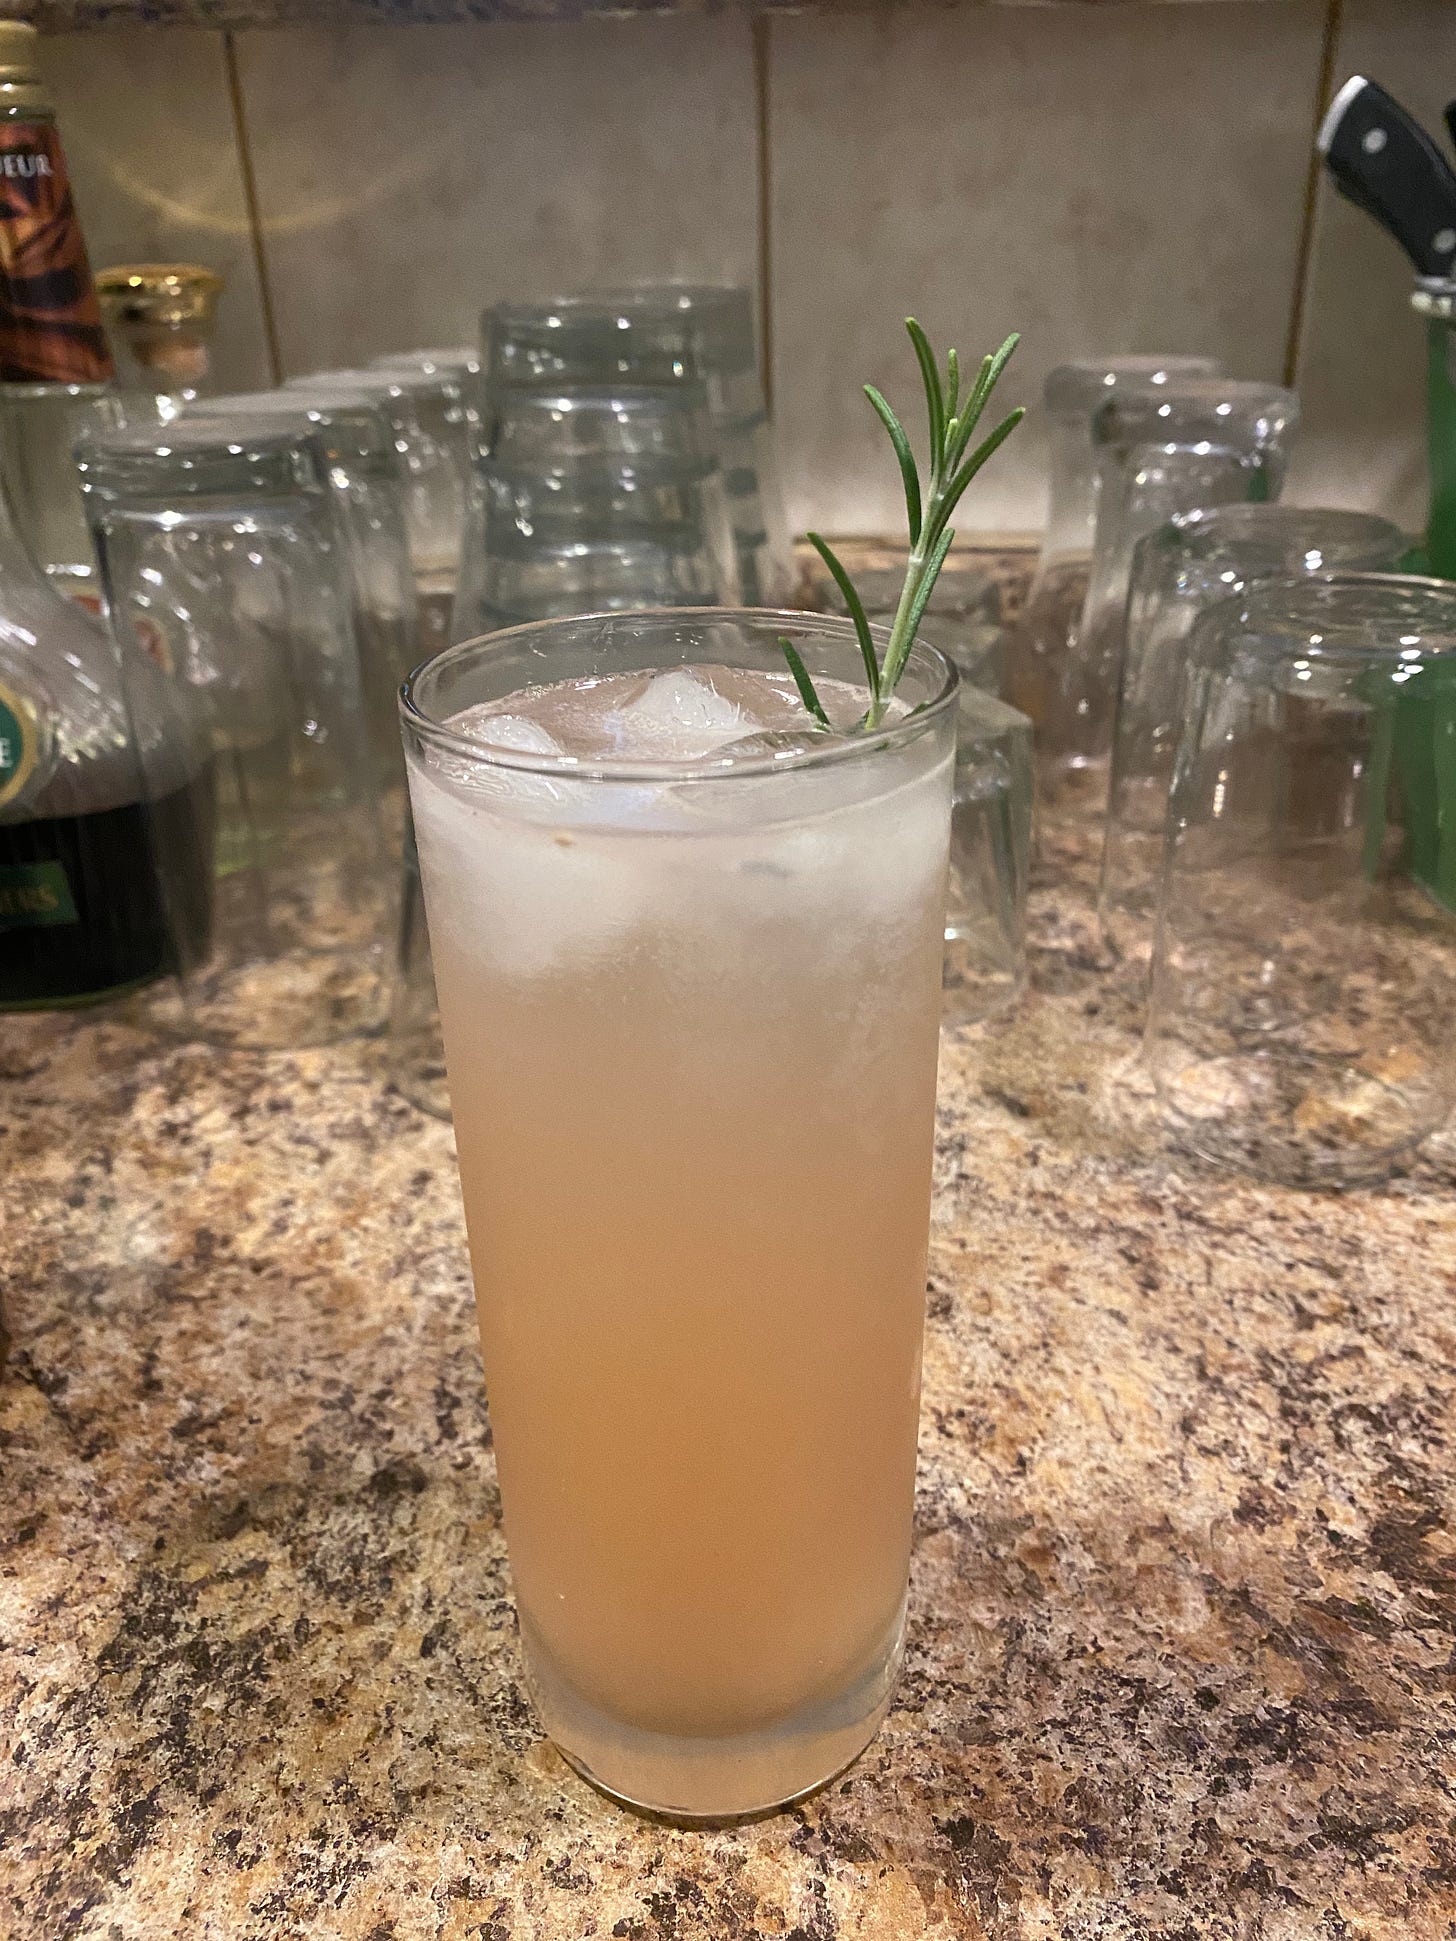 In a collins glass, the drink described below. Ice cubes float at the top, and a sprig of rosemary sticks out of the glass on the right. The drink is pale pink in colour. Behind it on the bar are many overturned empty glasses.